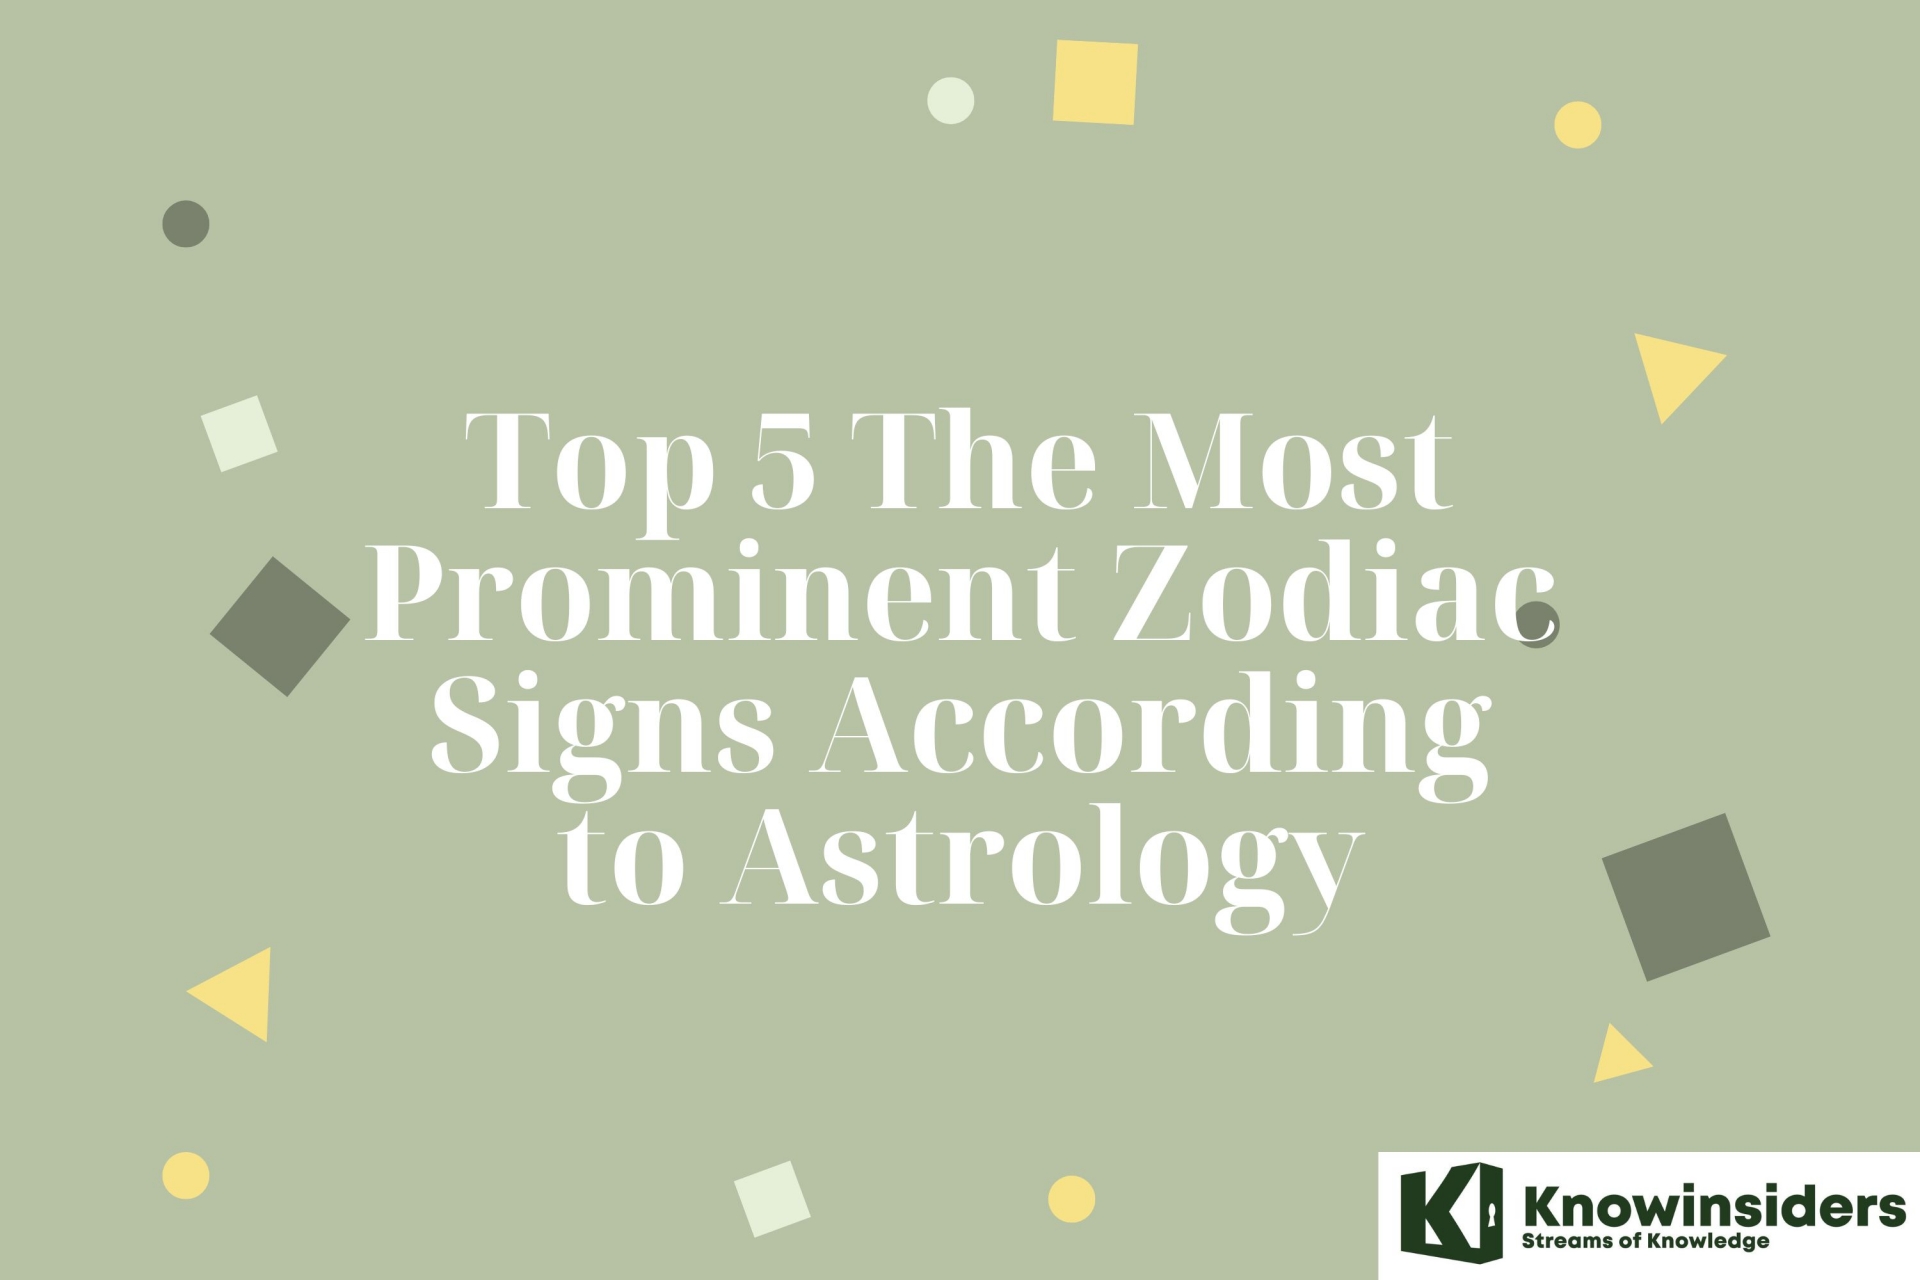 Top 5 The Most Prominent Zodiac Signs According to Astrology